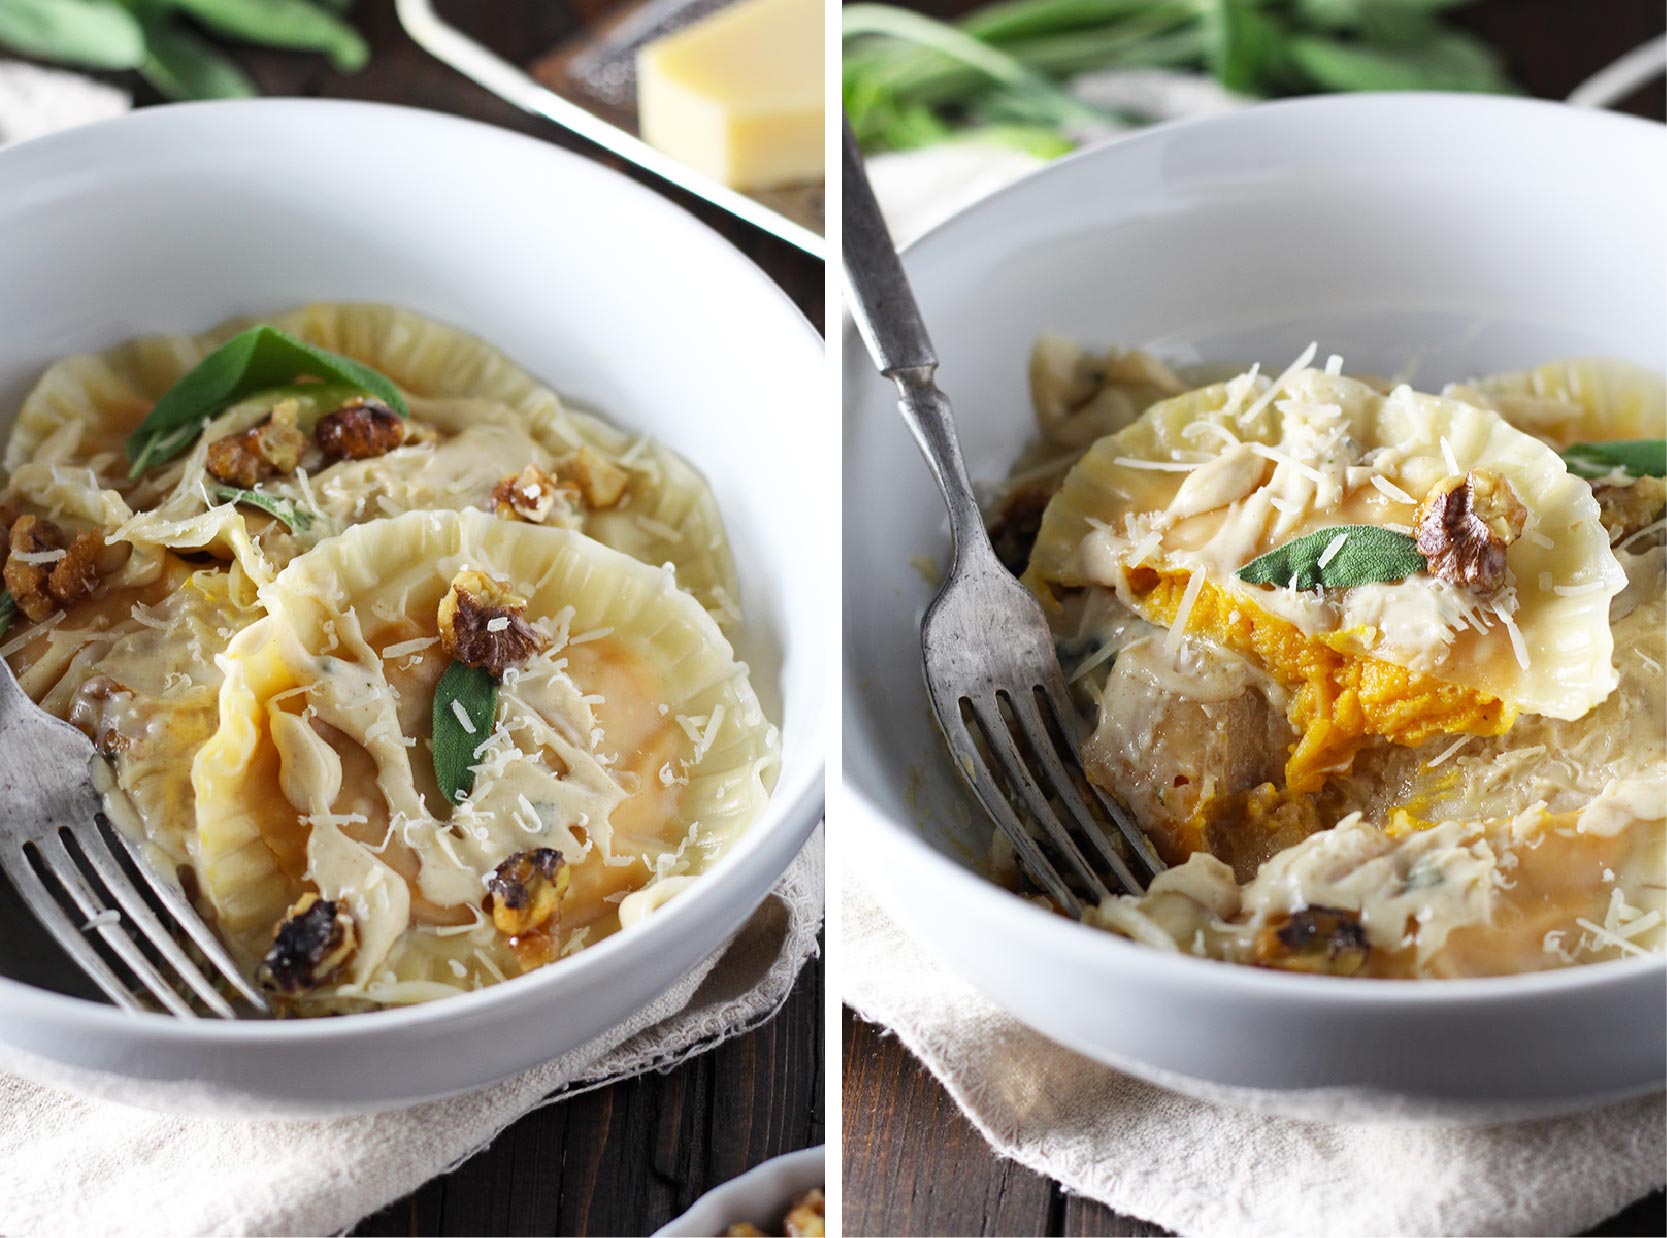 Butternut squash ravioli made super easy with wonton wrappers! Served with creamy and sweet brown butter sage sauce and homemade candied walnuts.